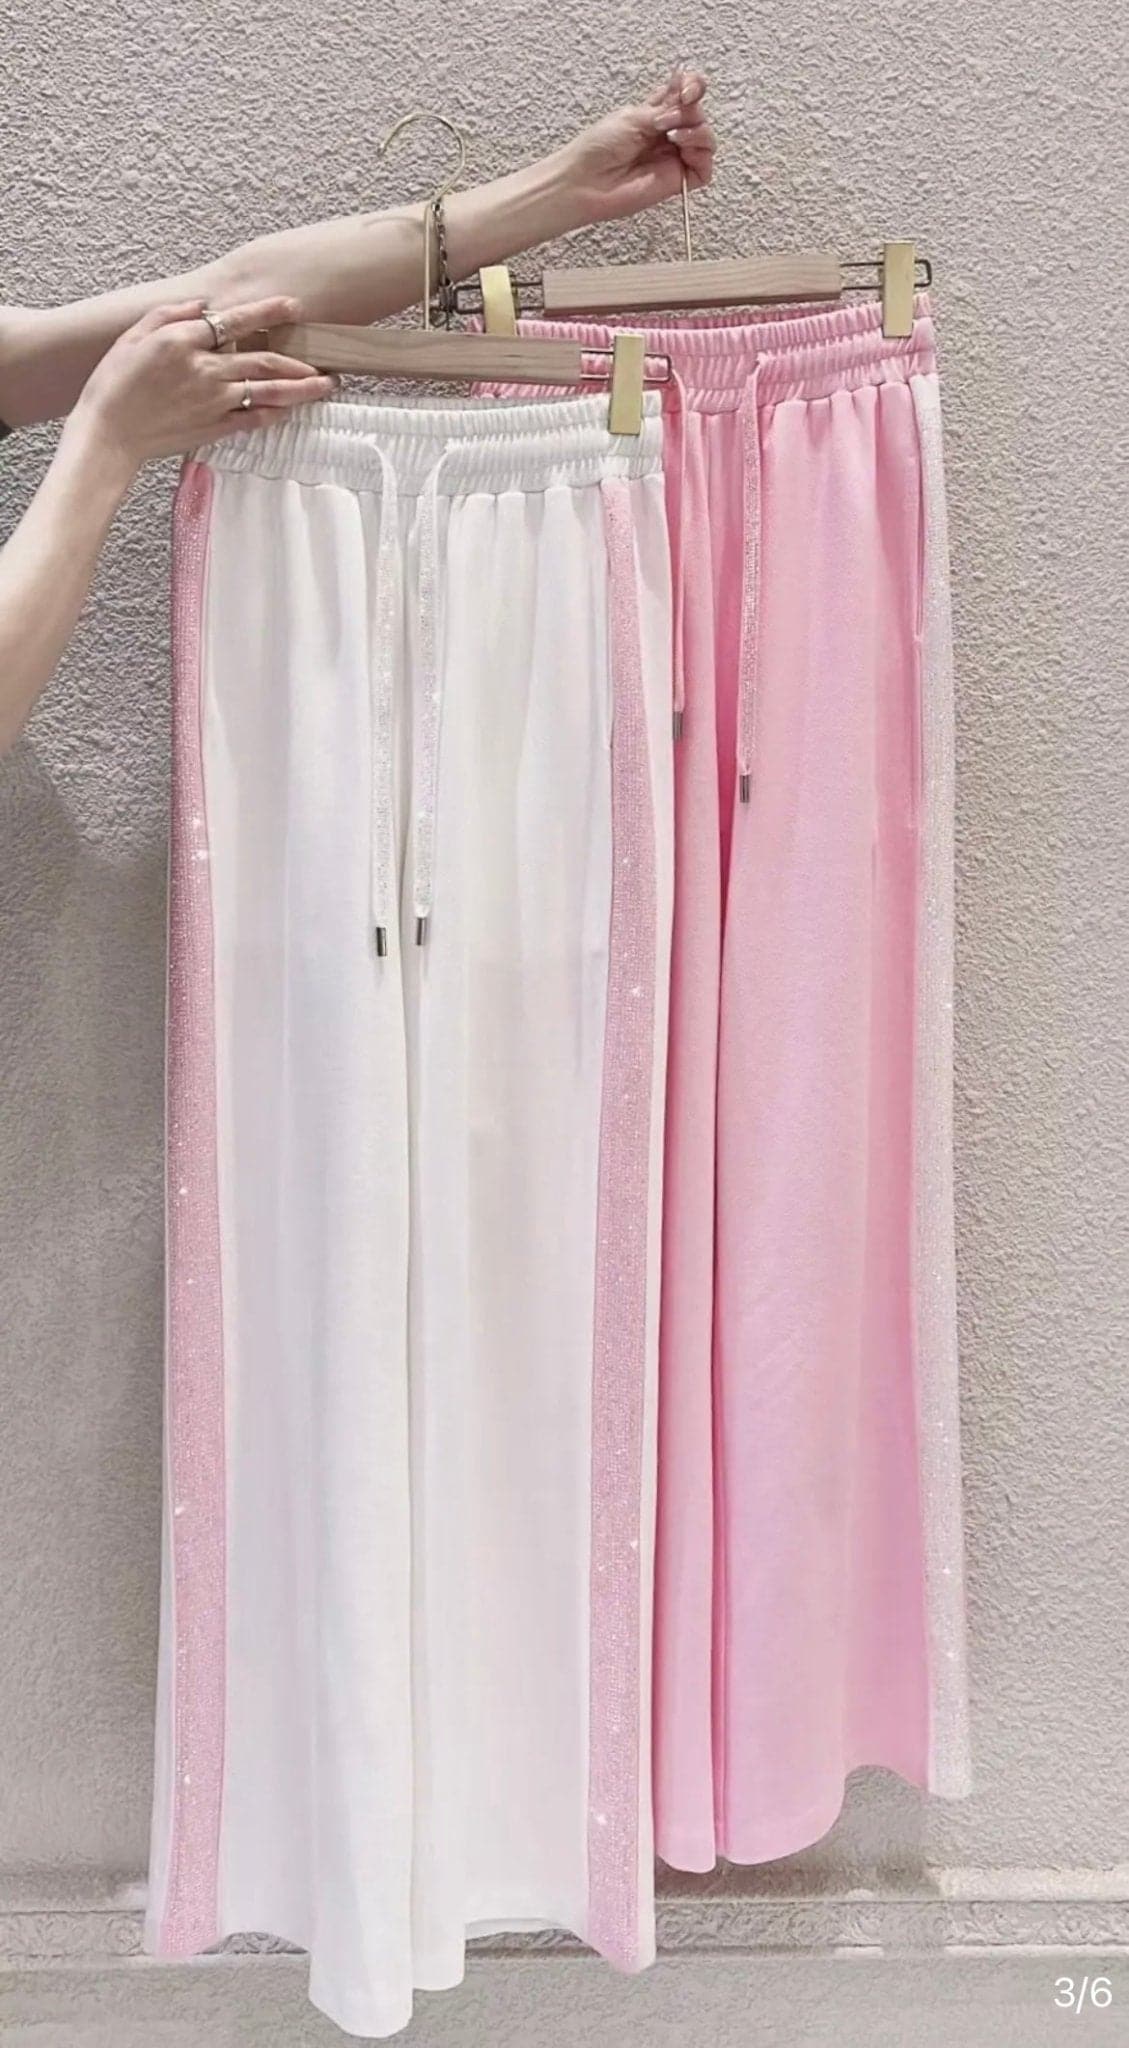 Pink Striped Loose Casual Pants - Wandering Woman